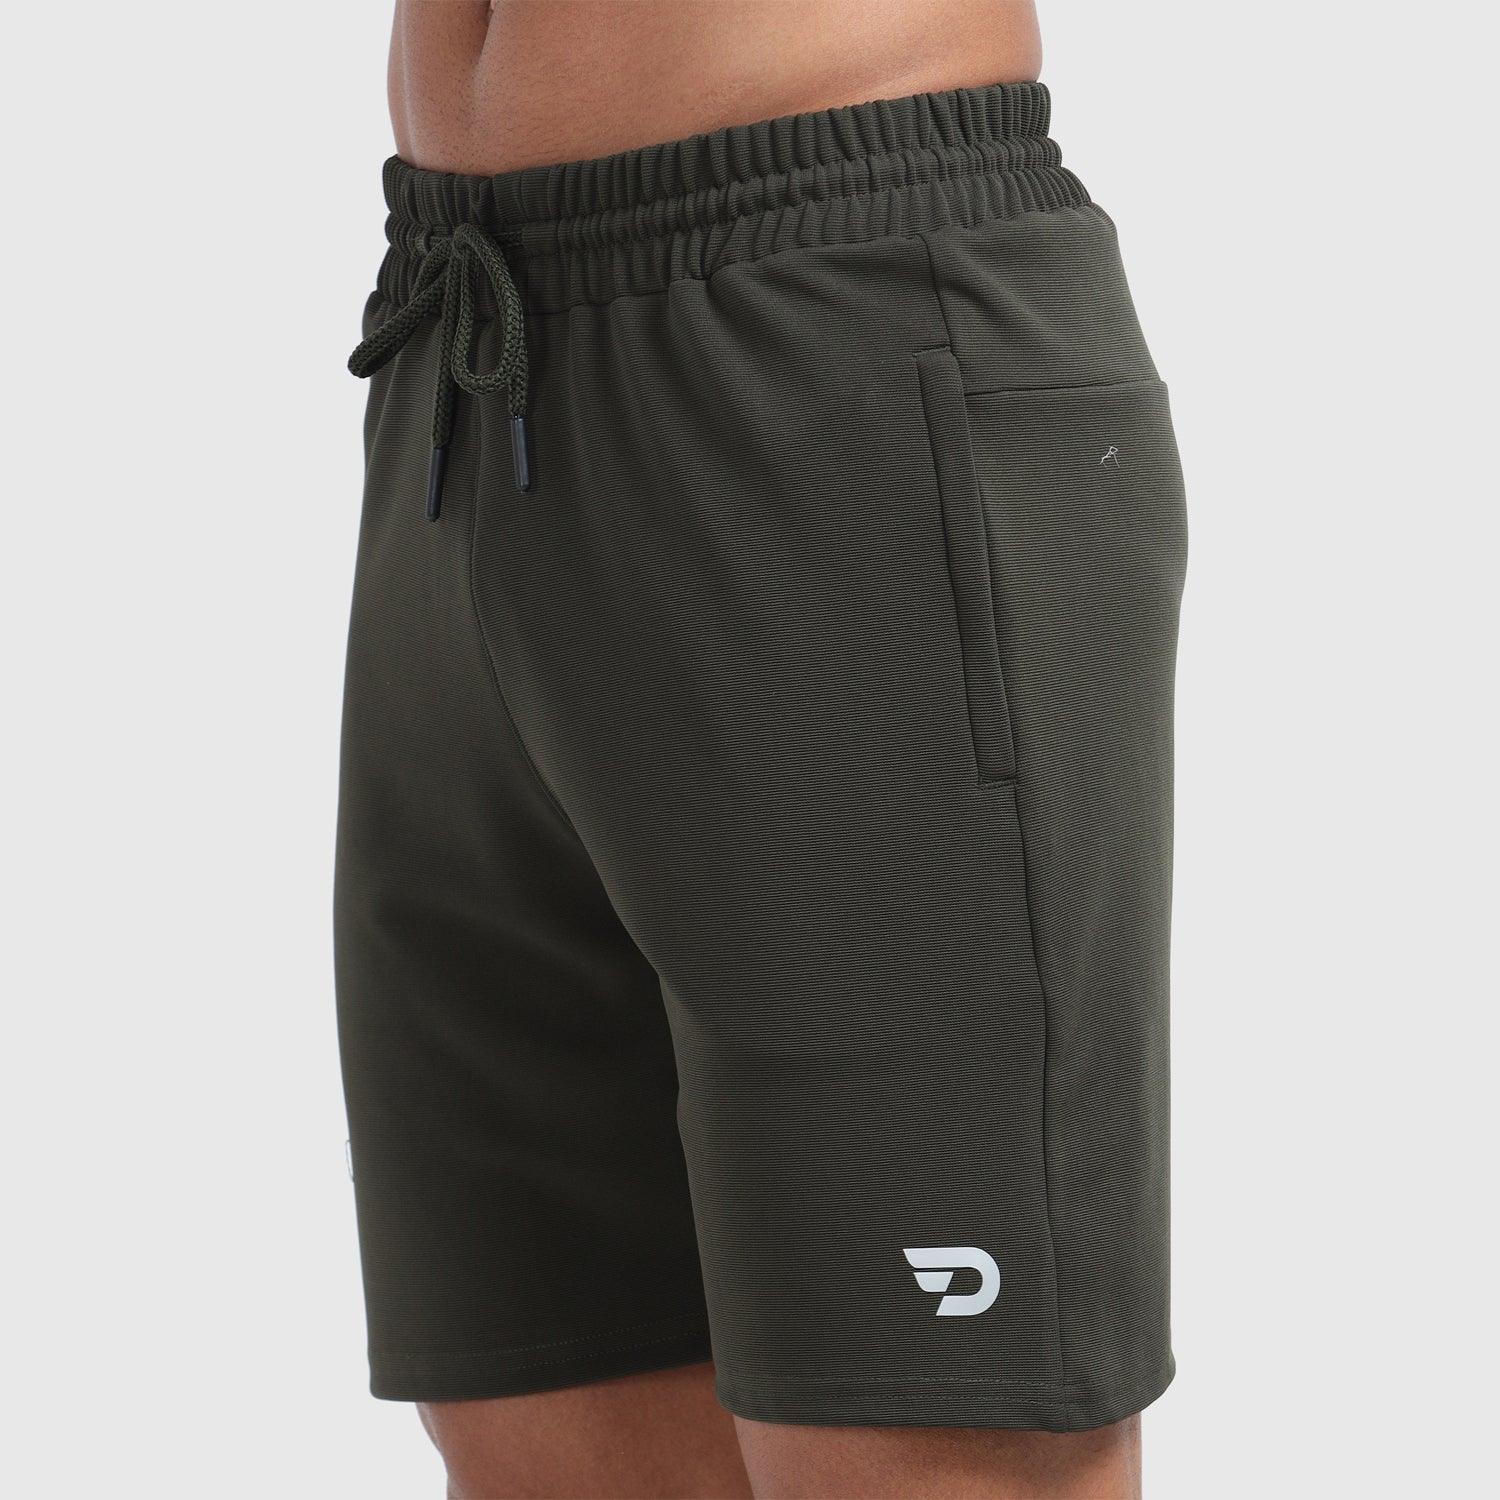 Denmonk's fashionable Trekready core olive shorts for men will boost your level of gym fitness.